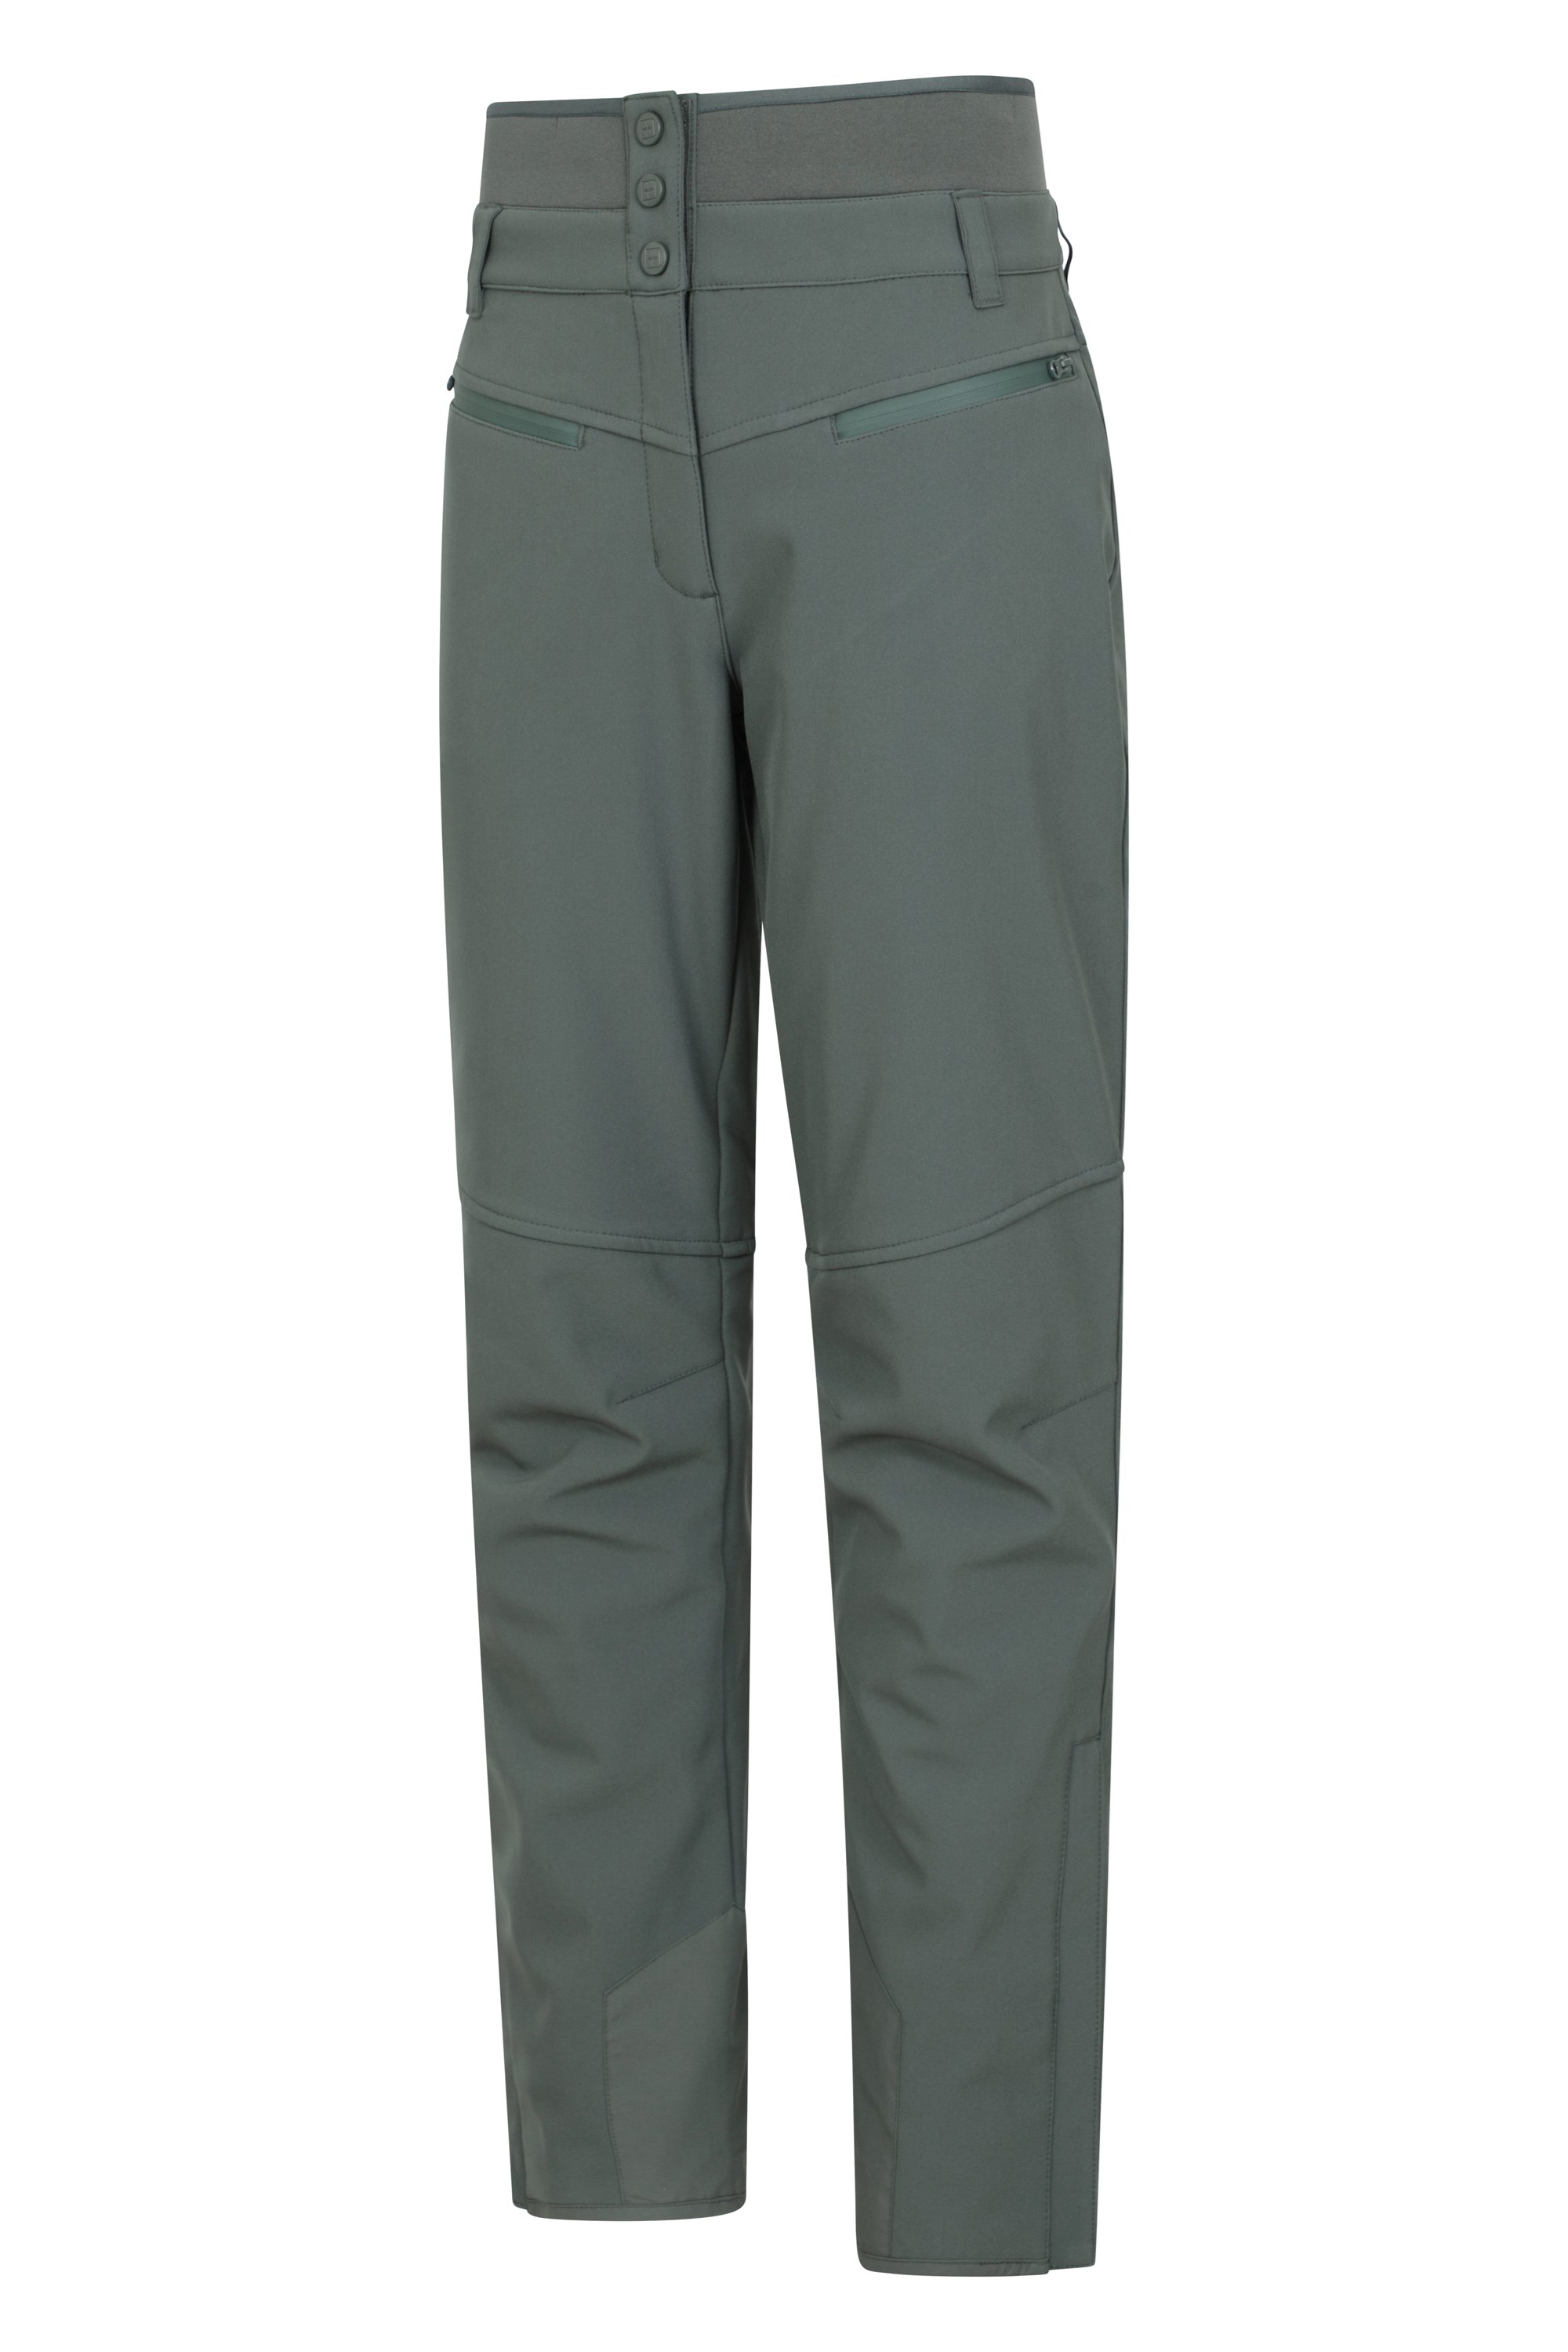 031355 AVALANCHE RECCO WMS RECYCLED SOFTSHELL SKI PANT